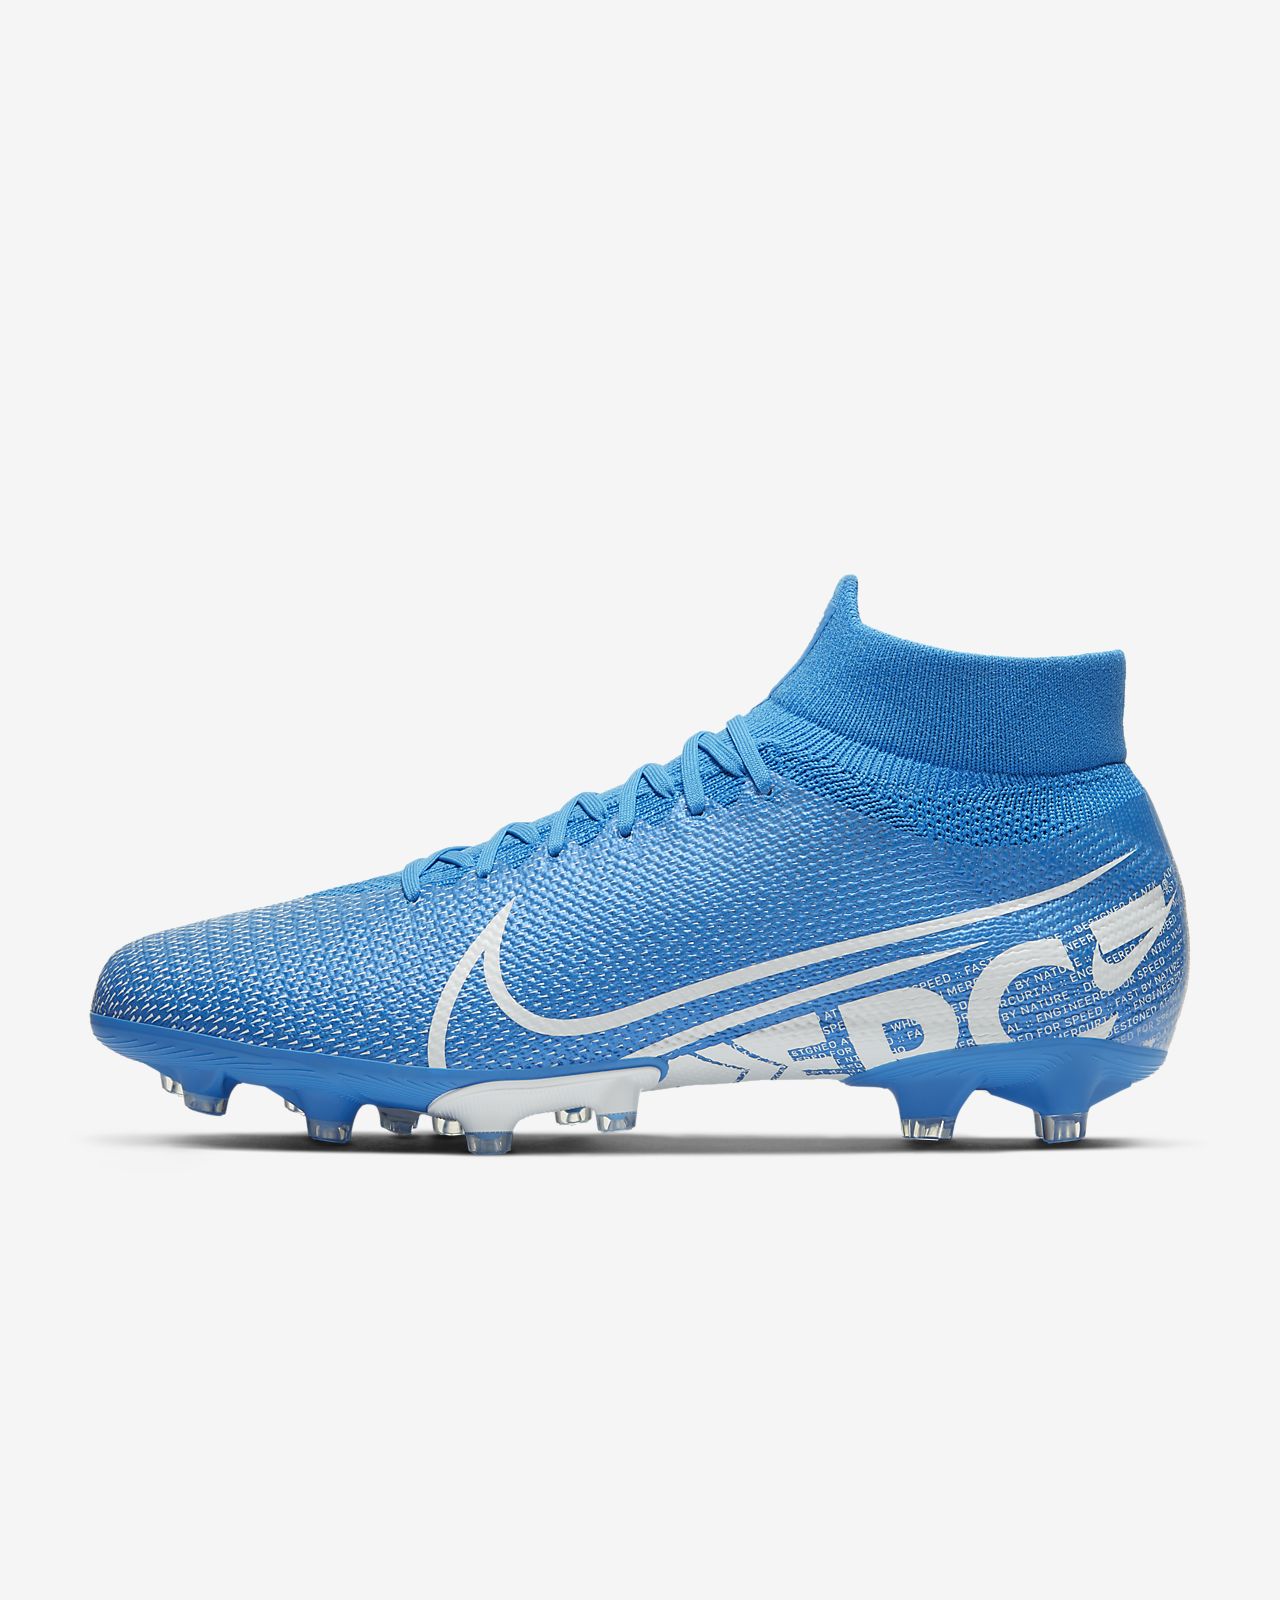 Nike Mercurial Superfly VII Pro FG 'NEW LIGHTS PACK